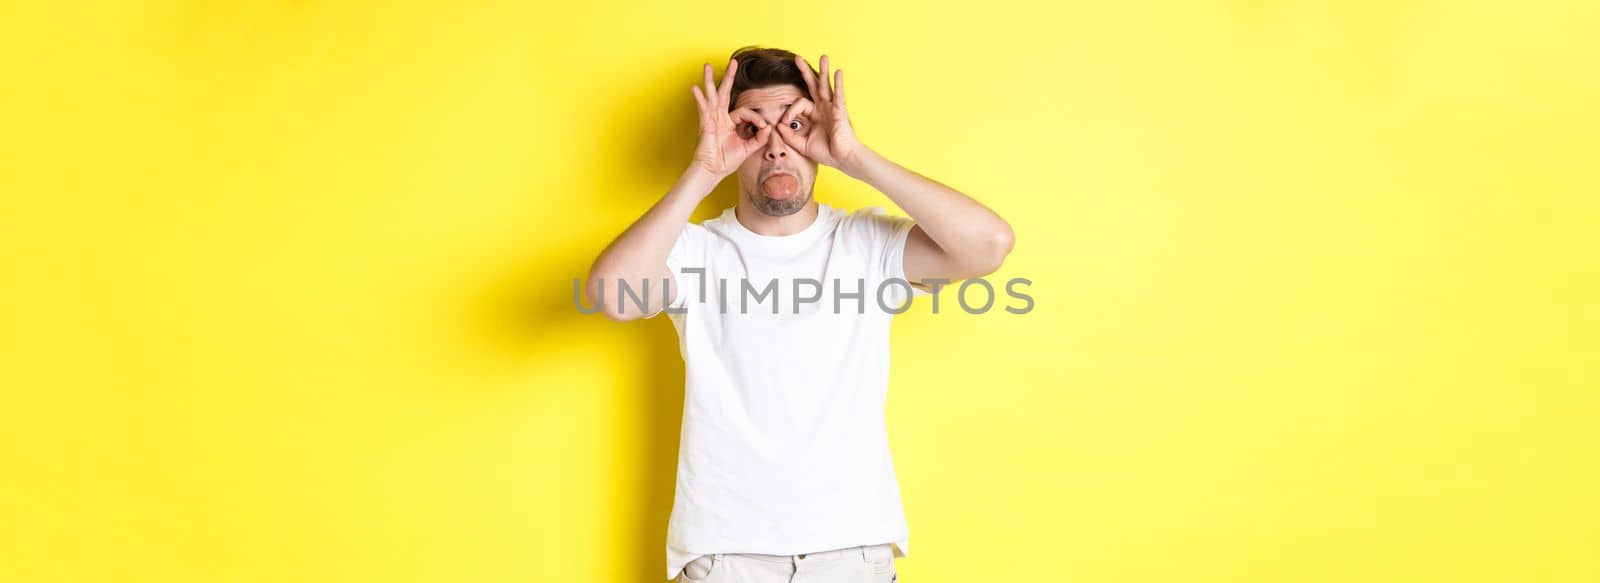 Young man making funny faces and showing tongue, fool around, standing in white t-shirt against yellow background. Copy space